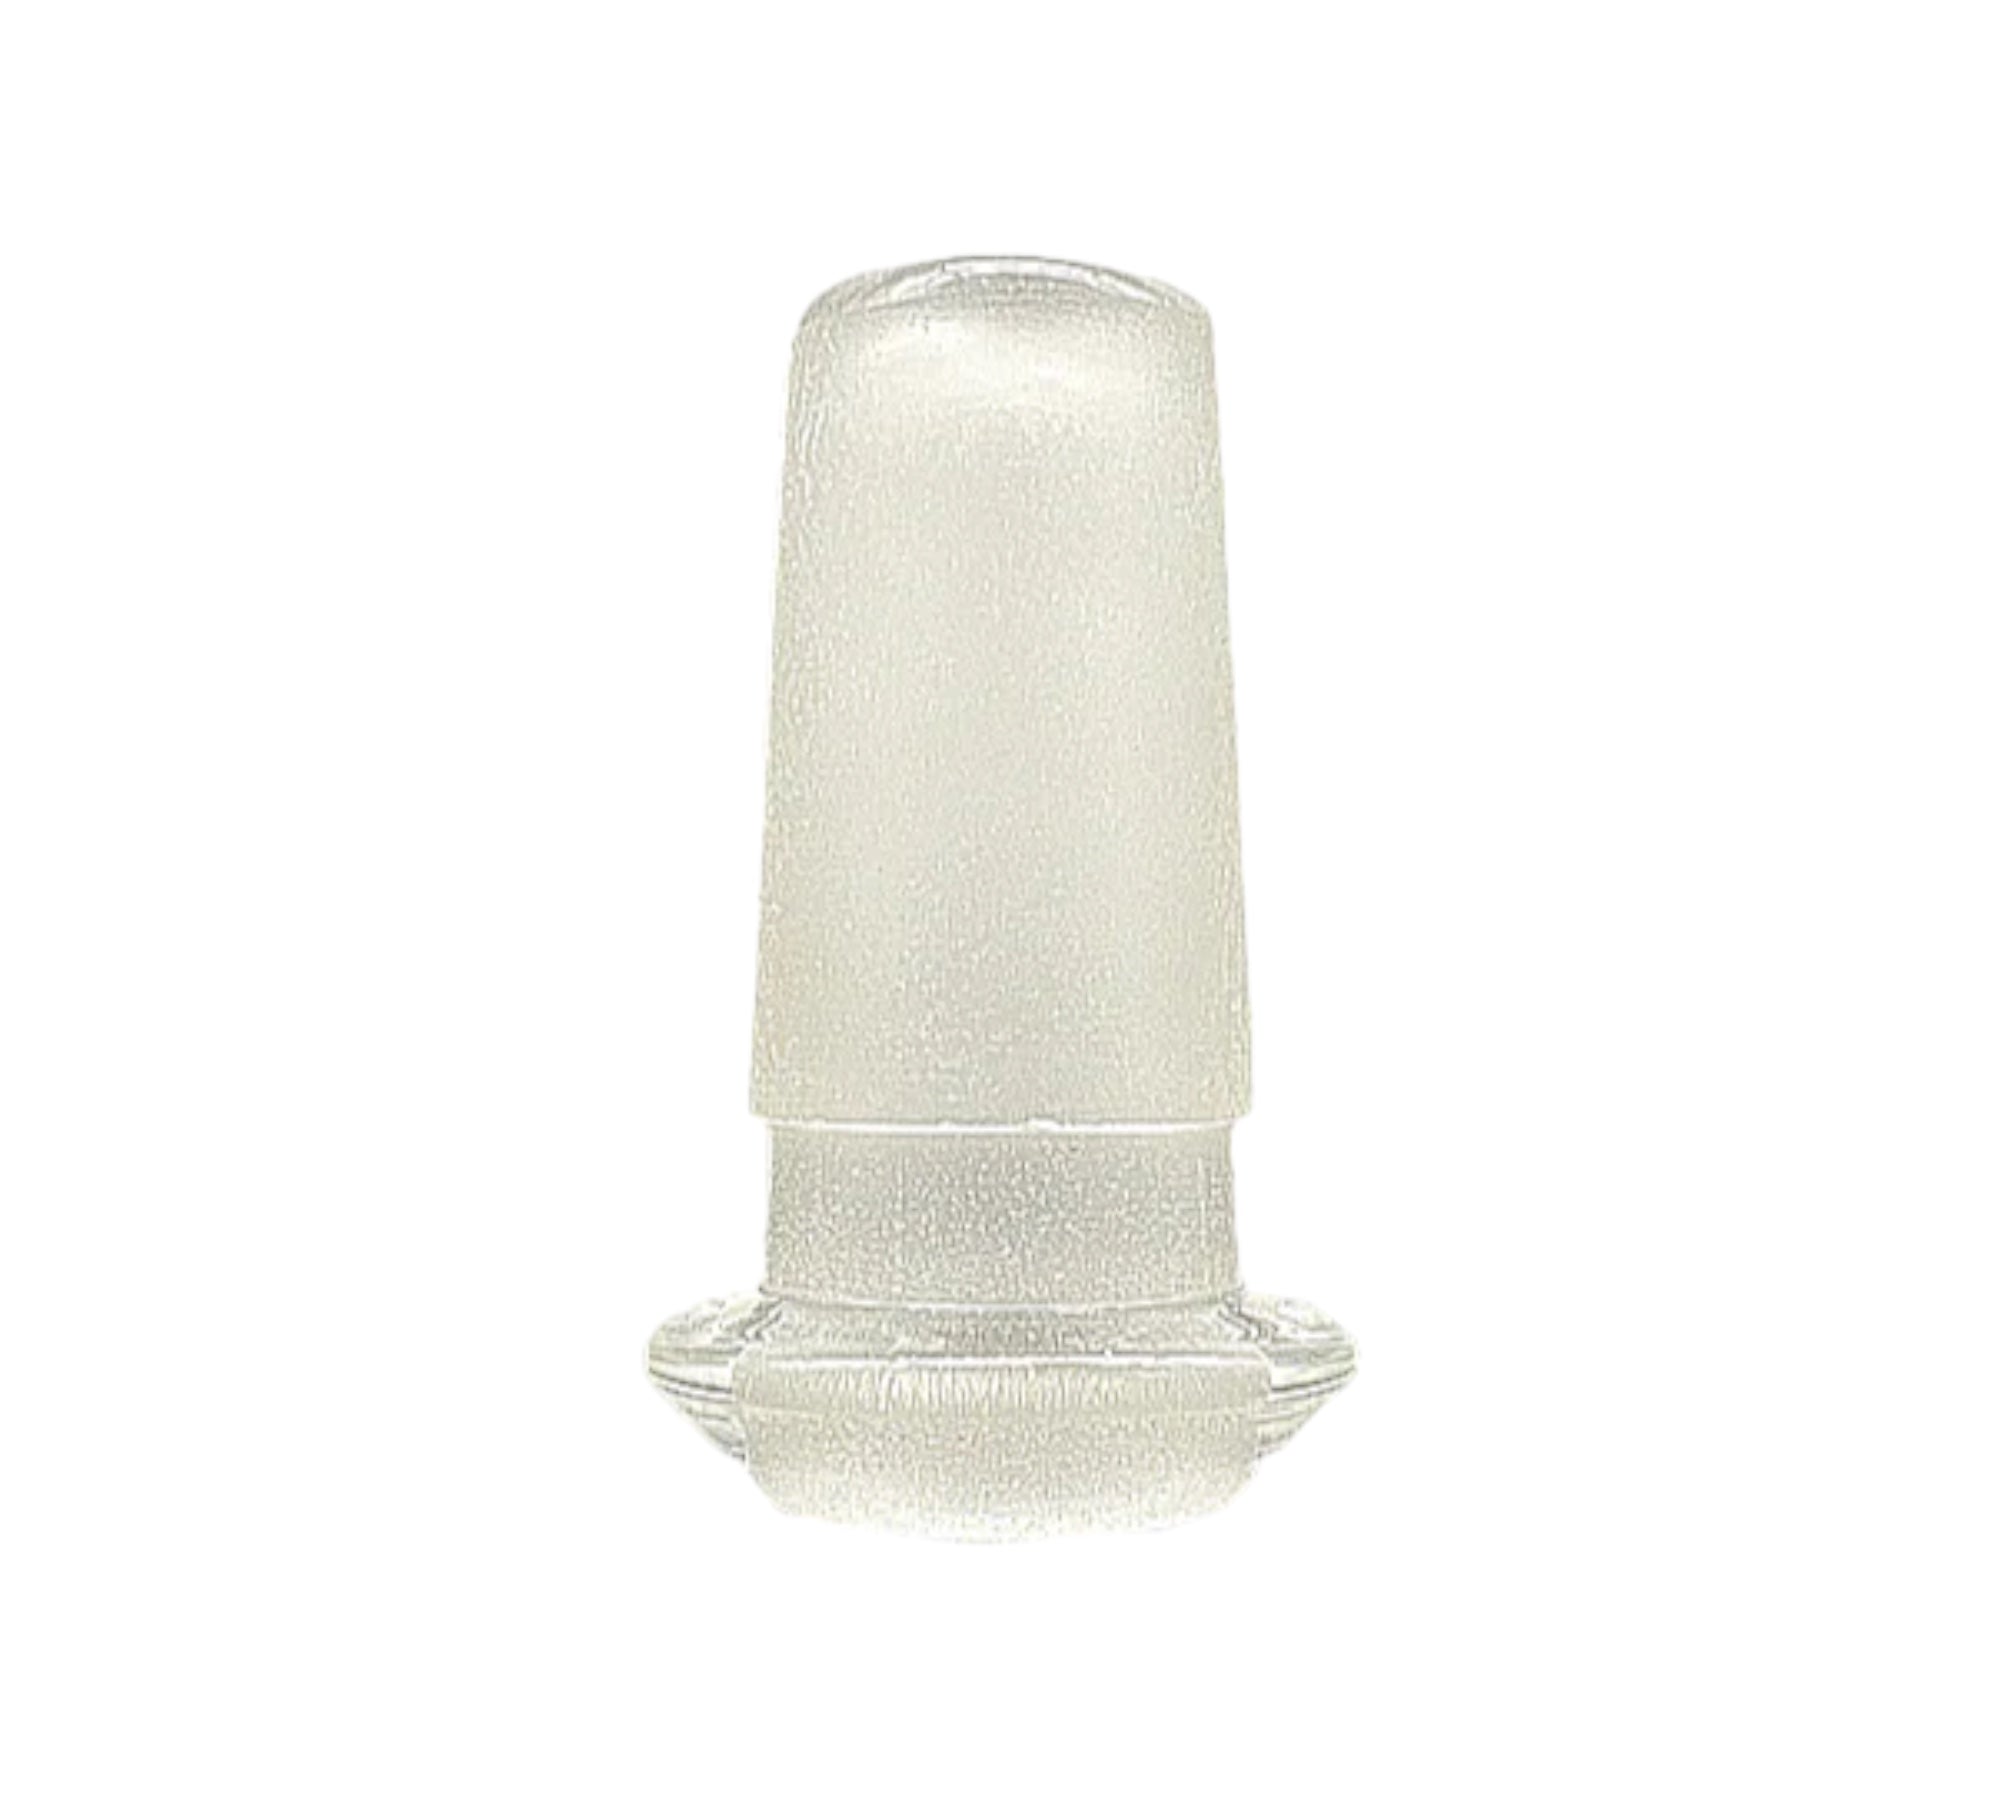 Glass Adapter For Bongs And Dab Rigs - 14mm Male To 10mm Female